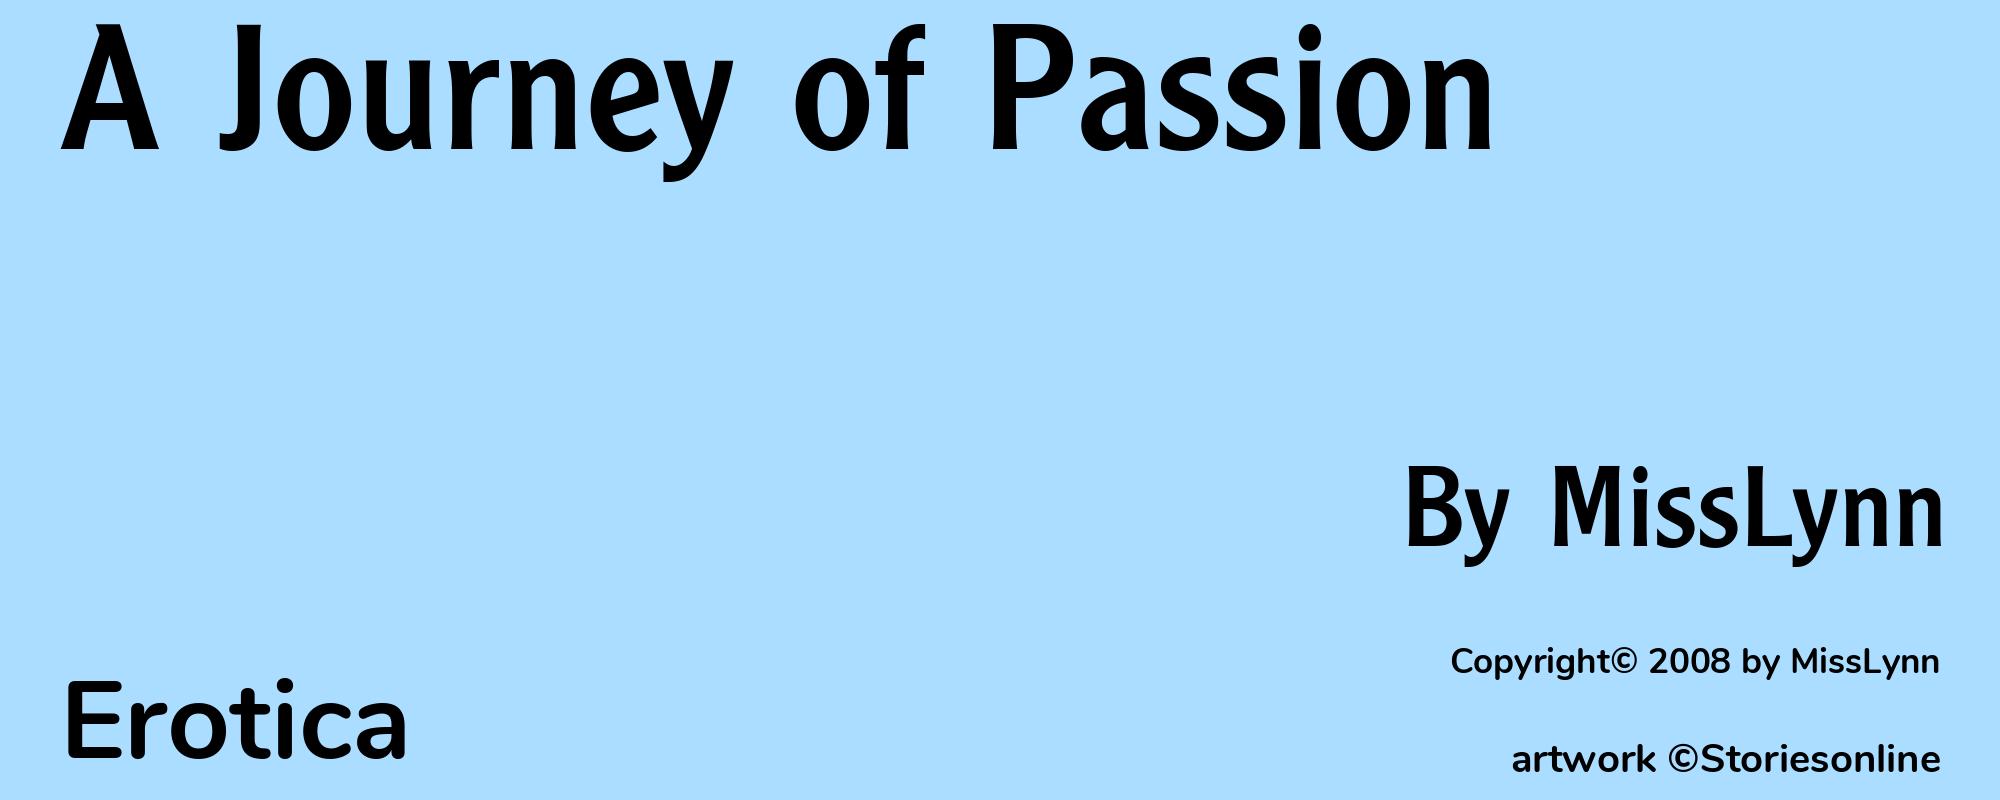 A Journey of Passion - Cover